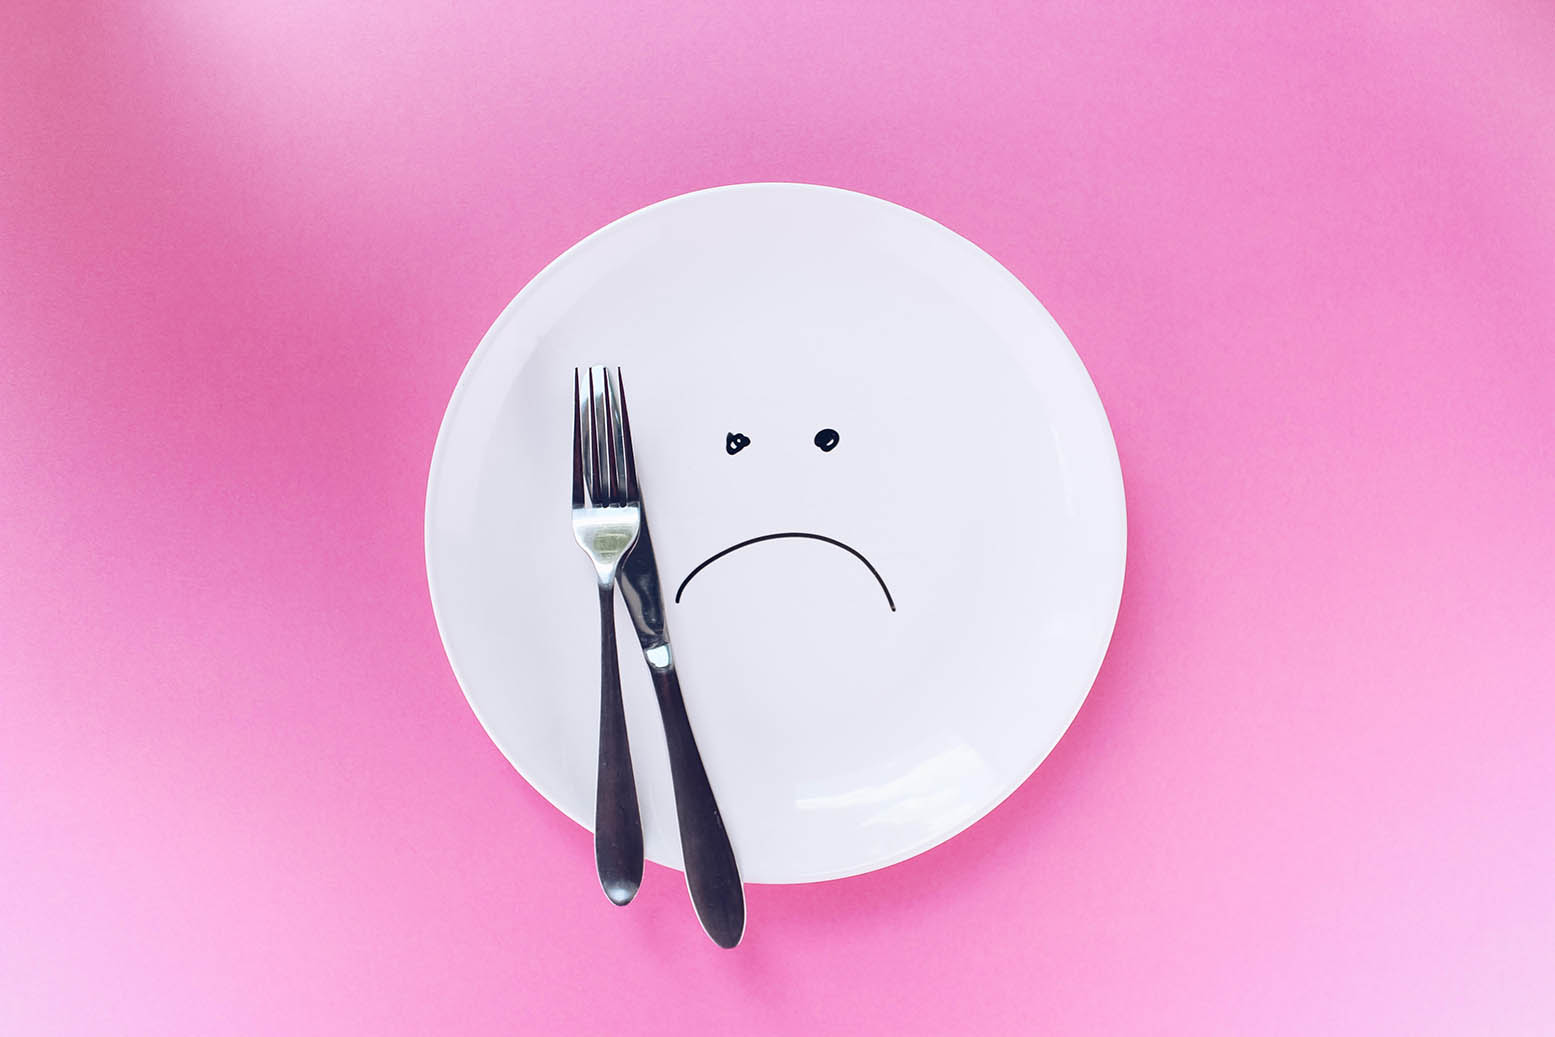 Eat More Now That You're in Menopause